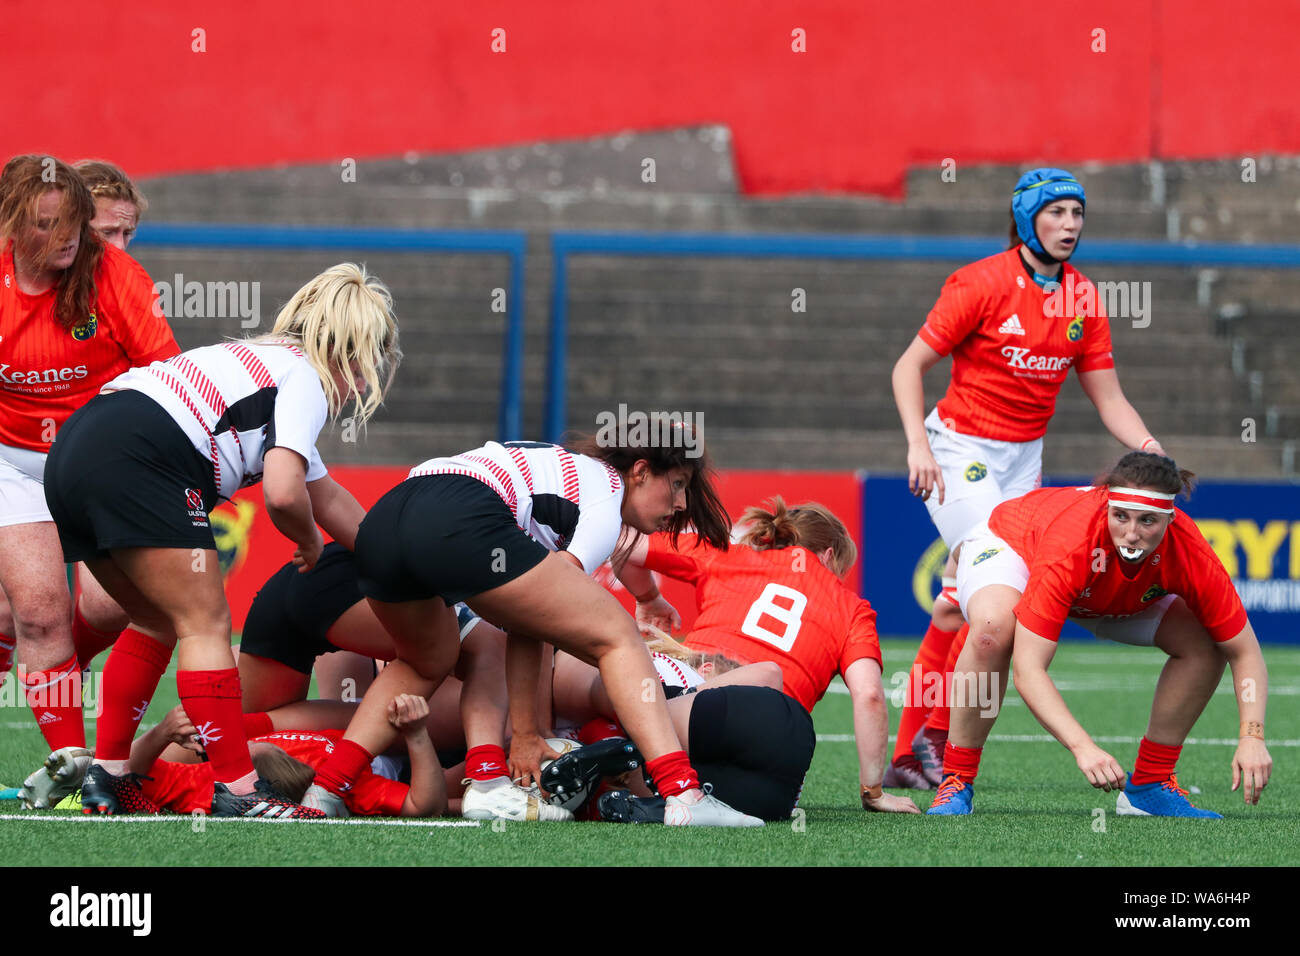 August 17th, 2019, Cork, Ireland - Action from the Munster Women Rugby (38) vs Ulster Women Rugby (12) match at the Irish Independent Park. Stock Photo